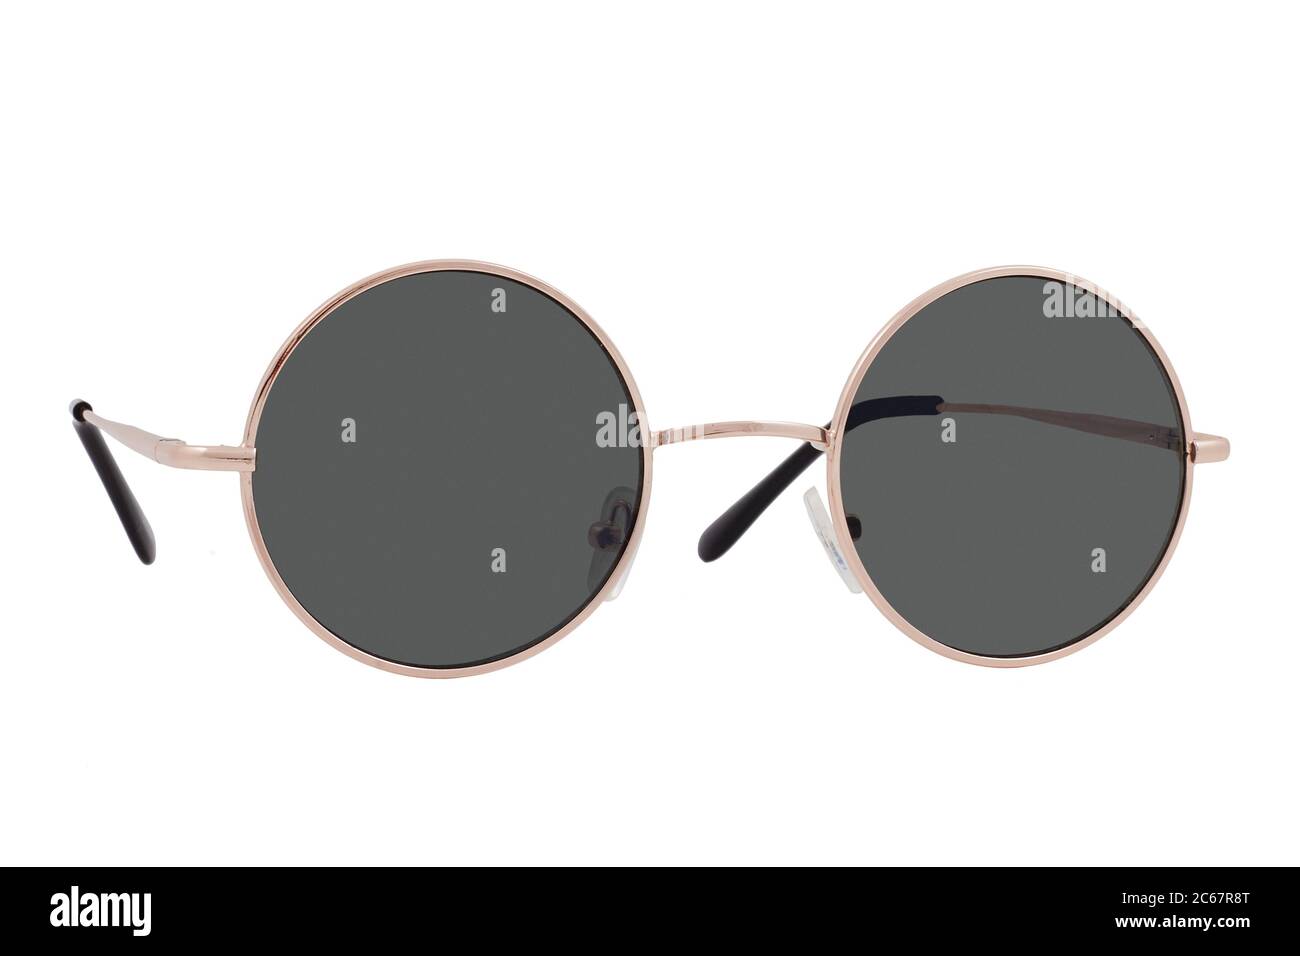 Round sunglasses with a gold frame and black lenses isolated on white  background Stock Photo - Alamy